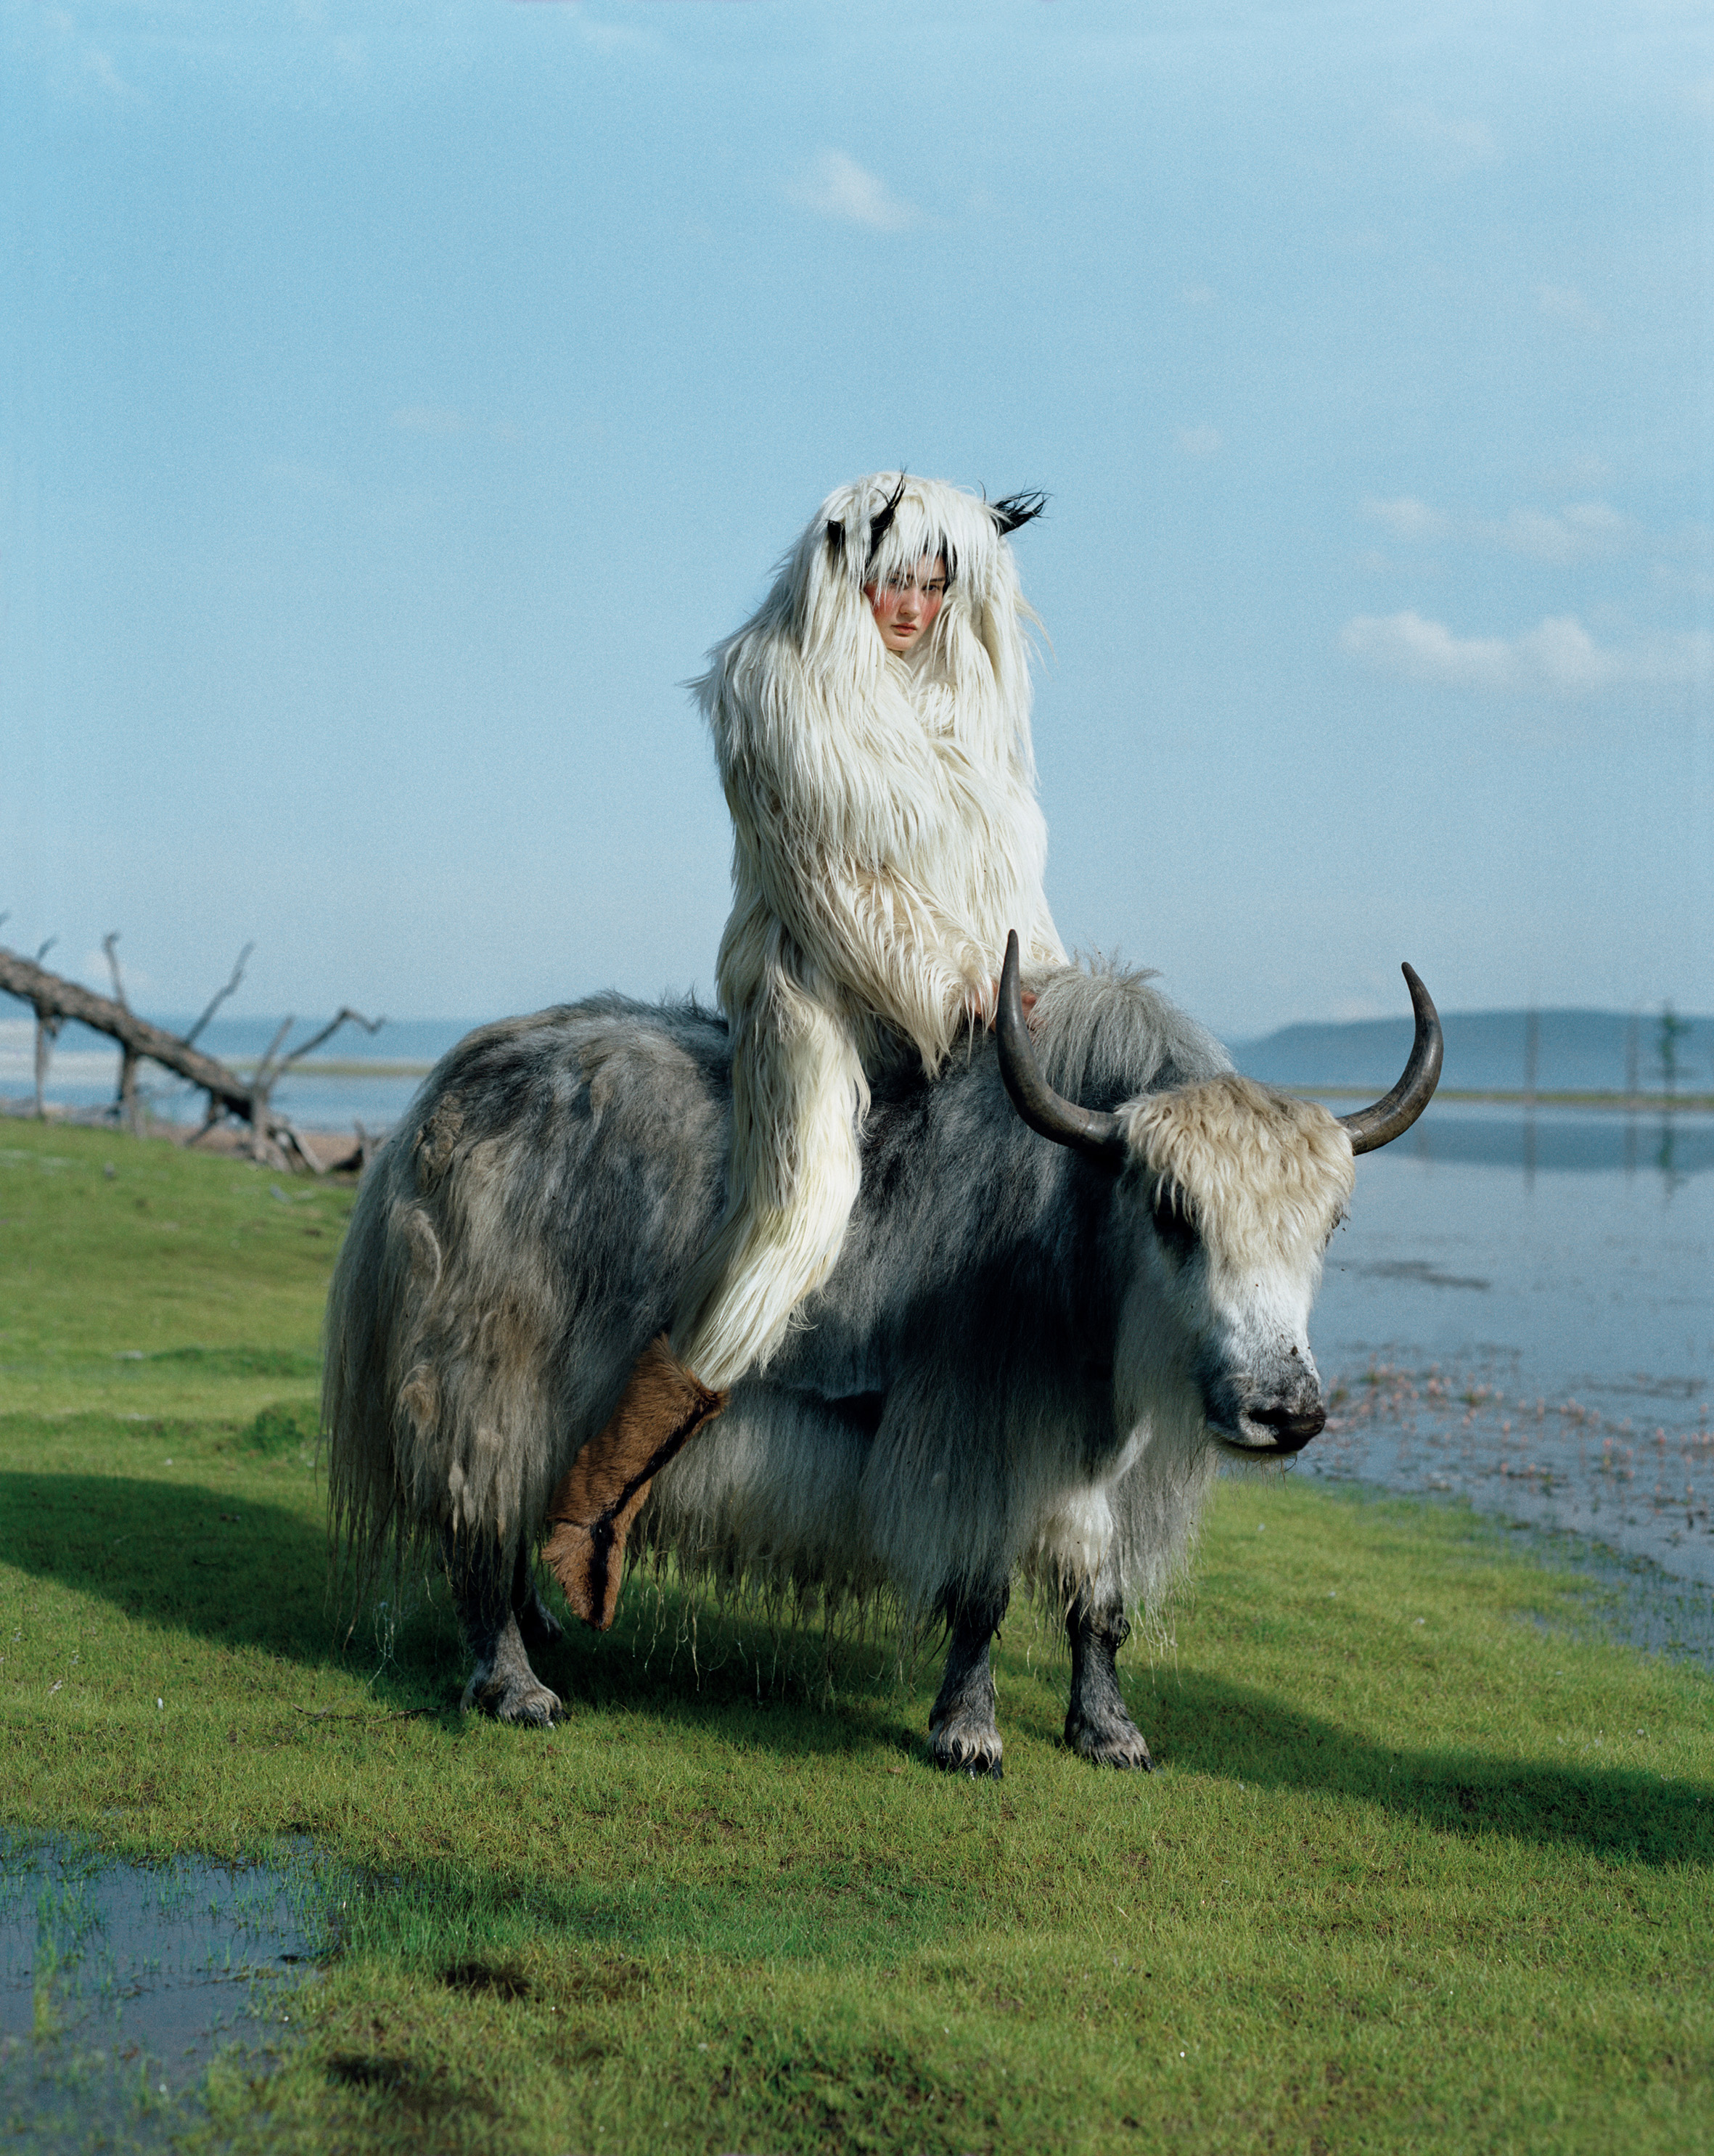 model riding yak on marsh, wears Giles Deacon goat hair jacket, Isabel Marant goat fur jacket worn as headpiece, Emma Roach goat hair trousers, fur boots, heavy blush, fashion shoot and travel diary in Mongolia